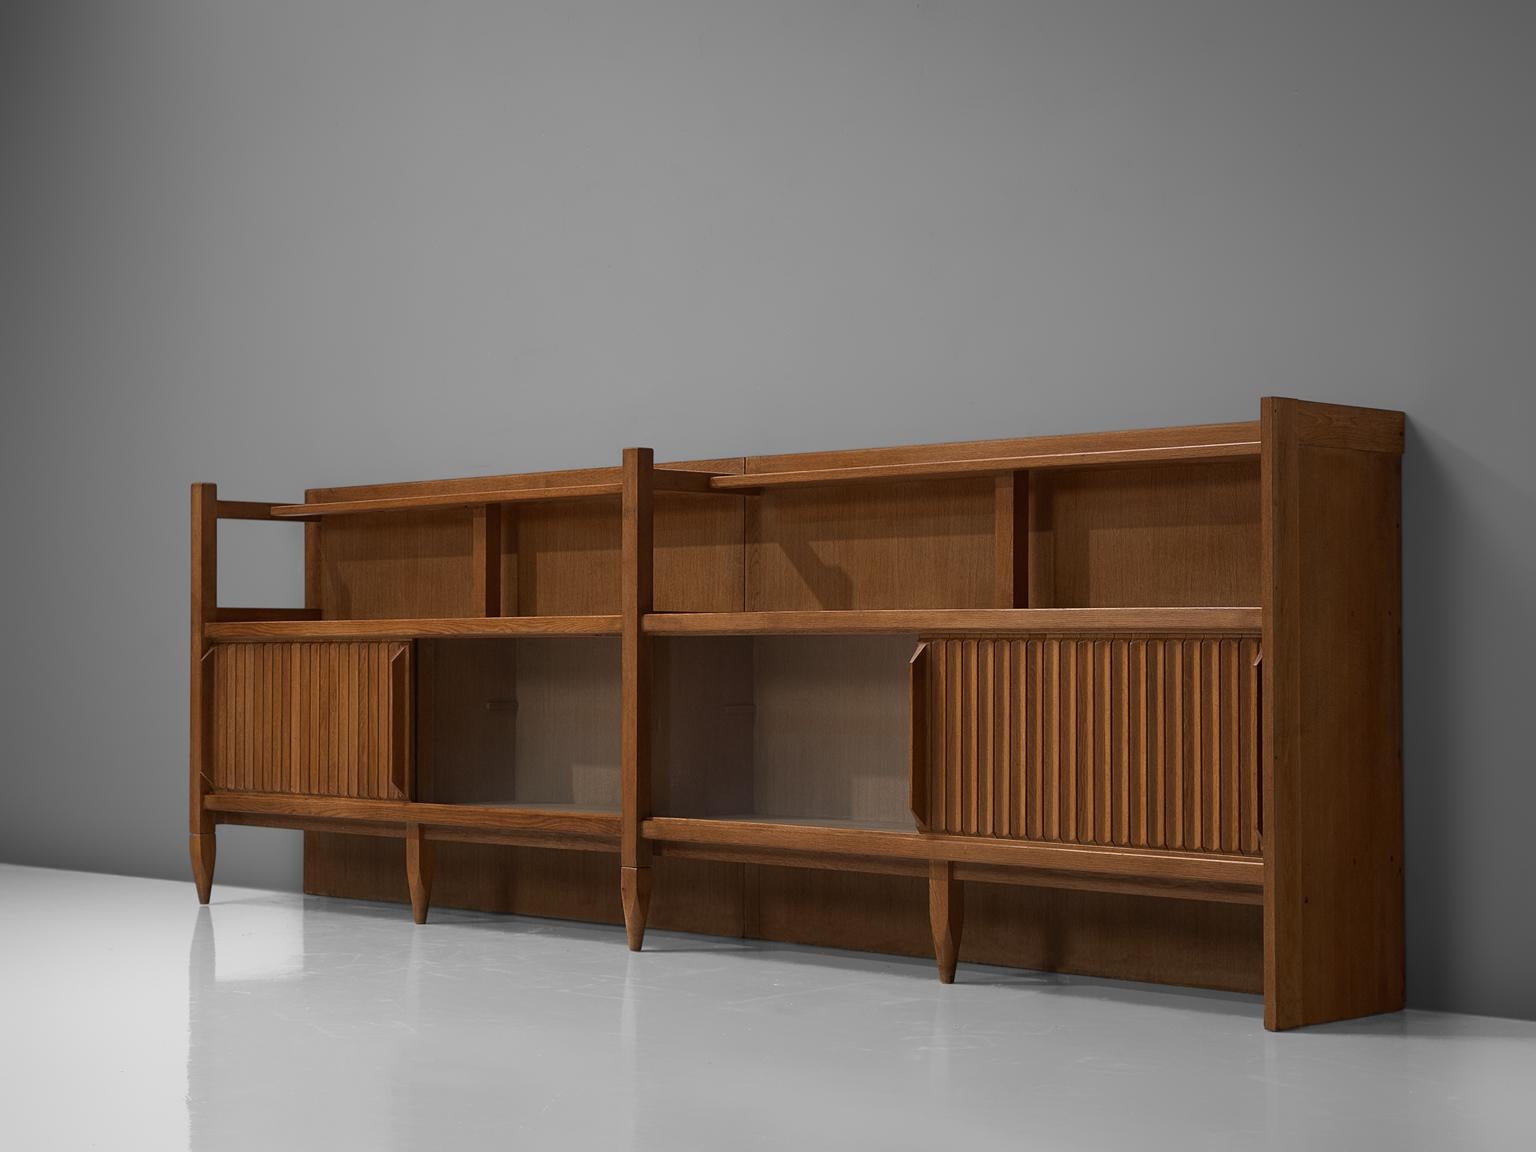 Guillerme et Chambron, large credenza, France, 1960s

This characteristic sideboard in solid oak holds is designed by the French designer duo Jacques Chambron (1914-2001) and Robert Guillerme (1913-1990). It has large and beautiful storage spaces